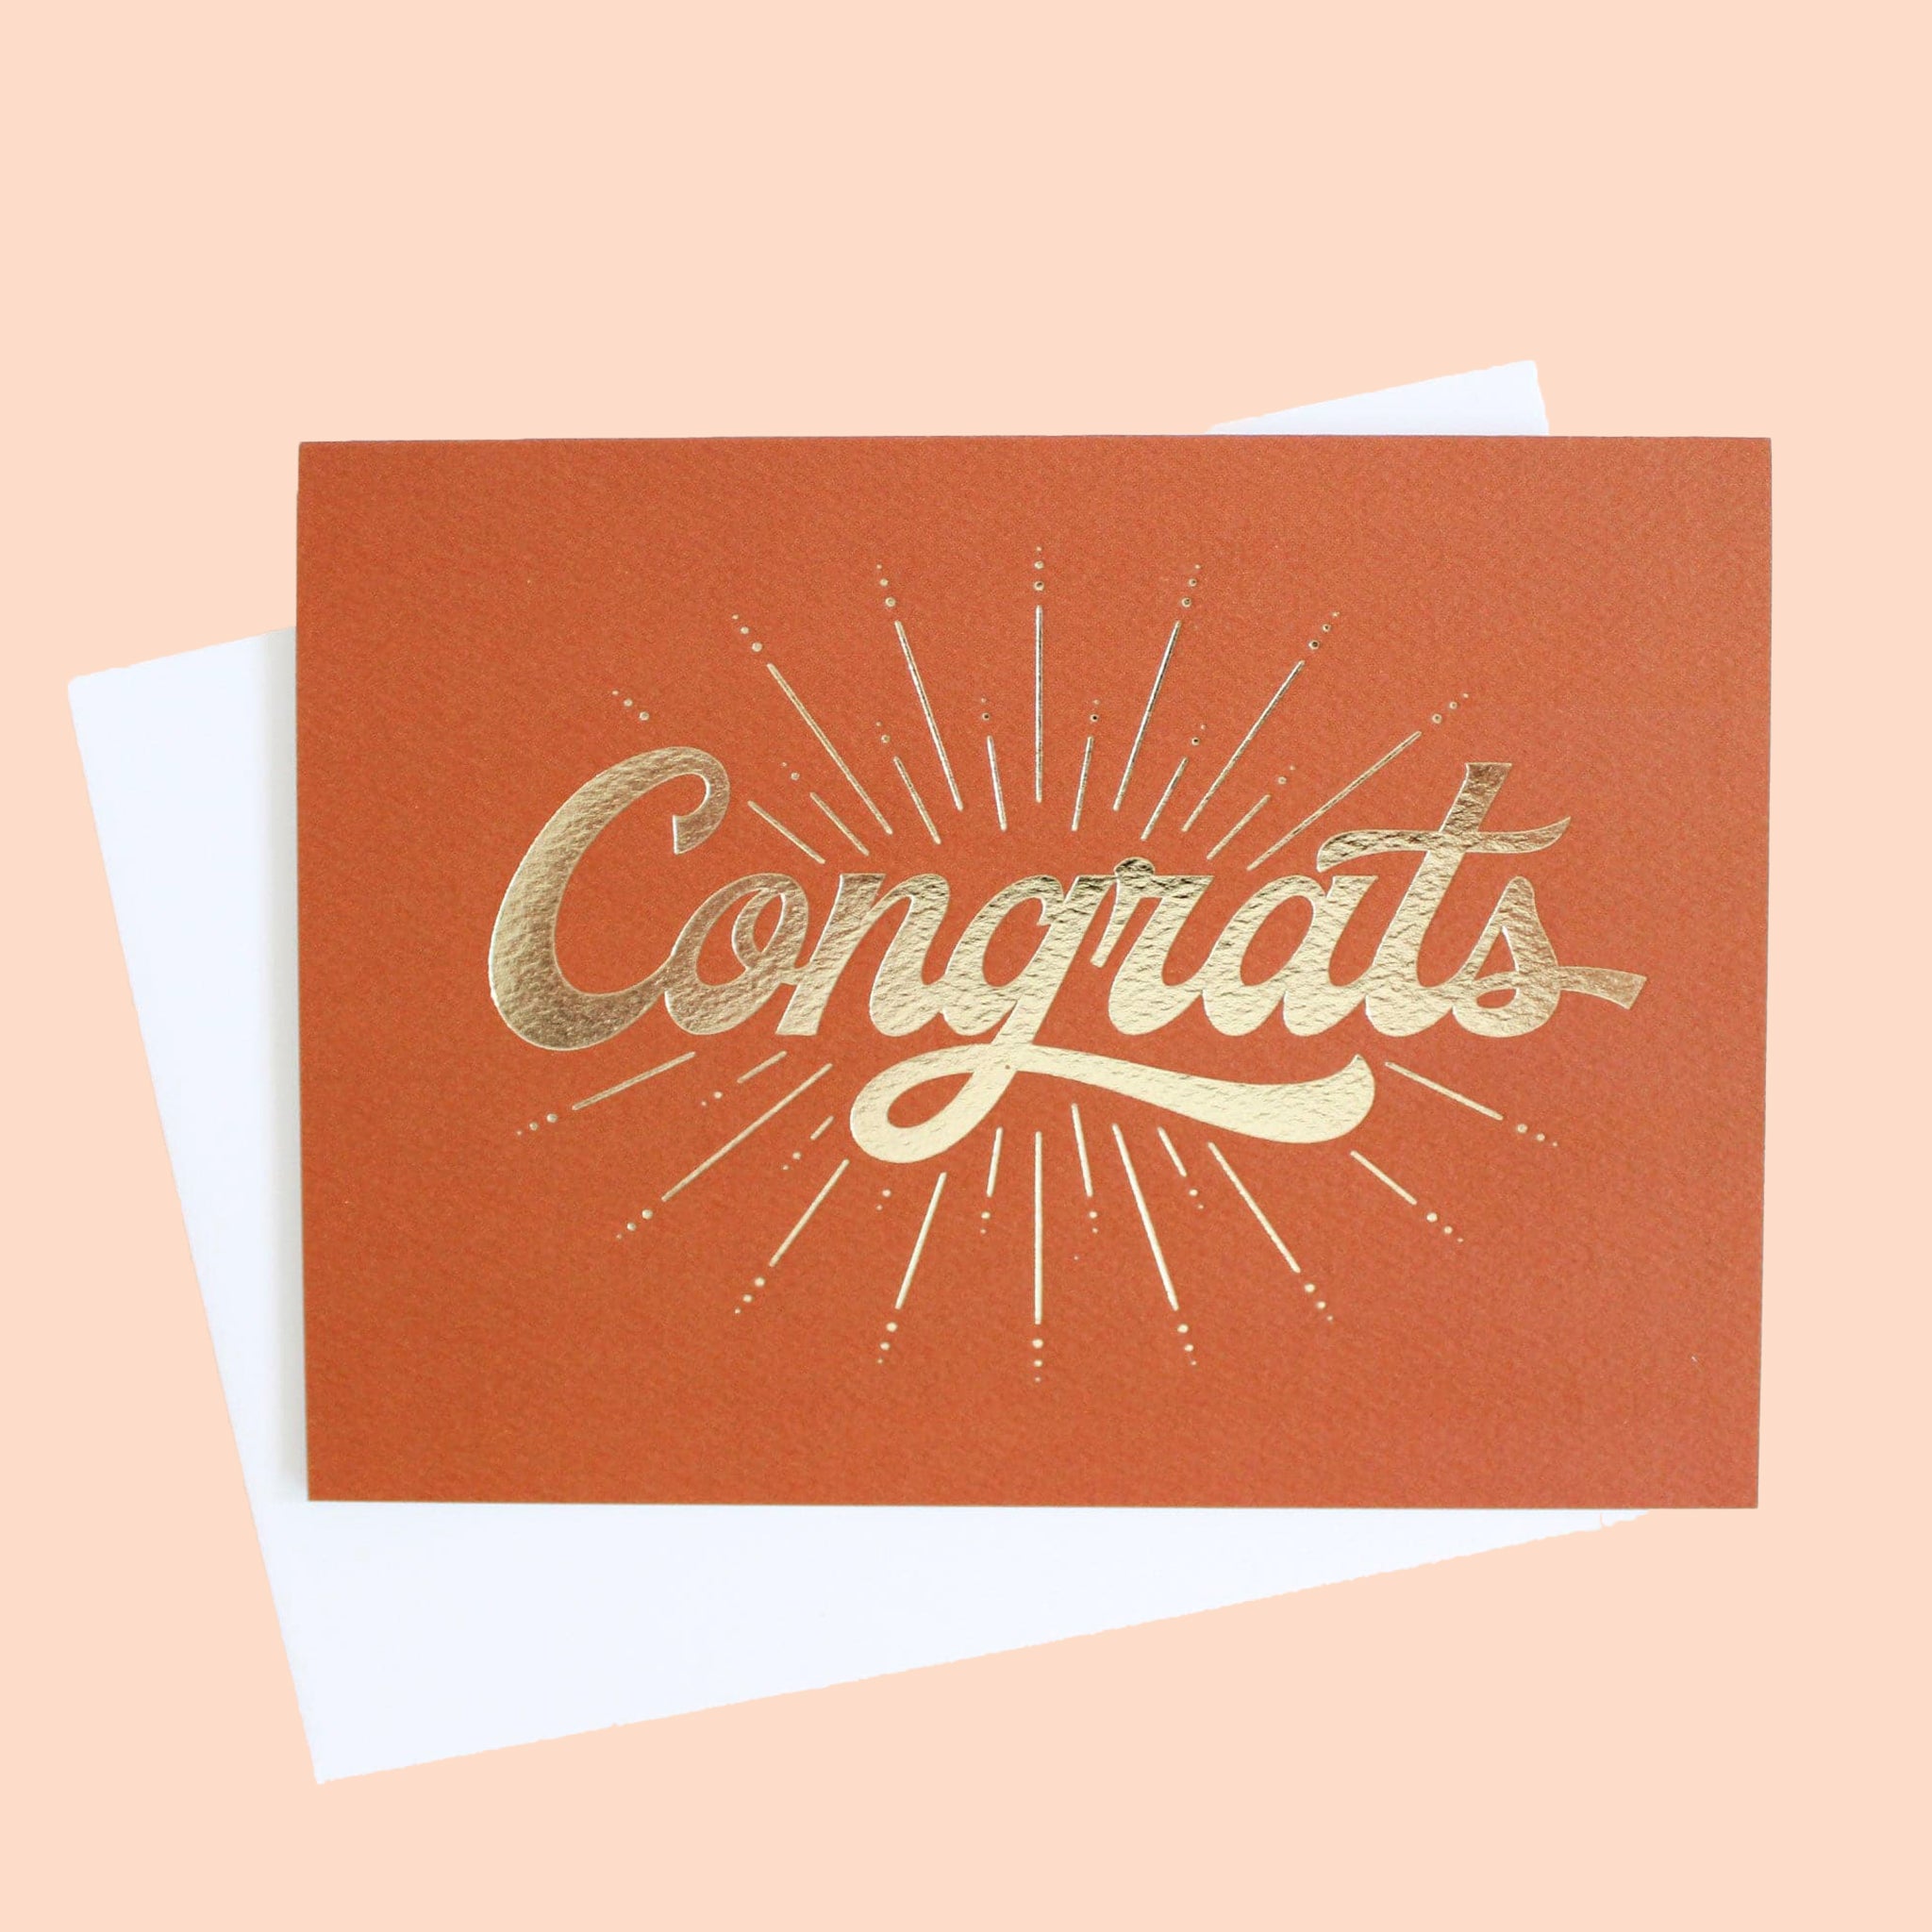 Deep orange colored greeting card with a gold foil starburst design surrounding the word congrats.